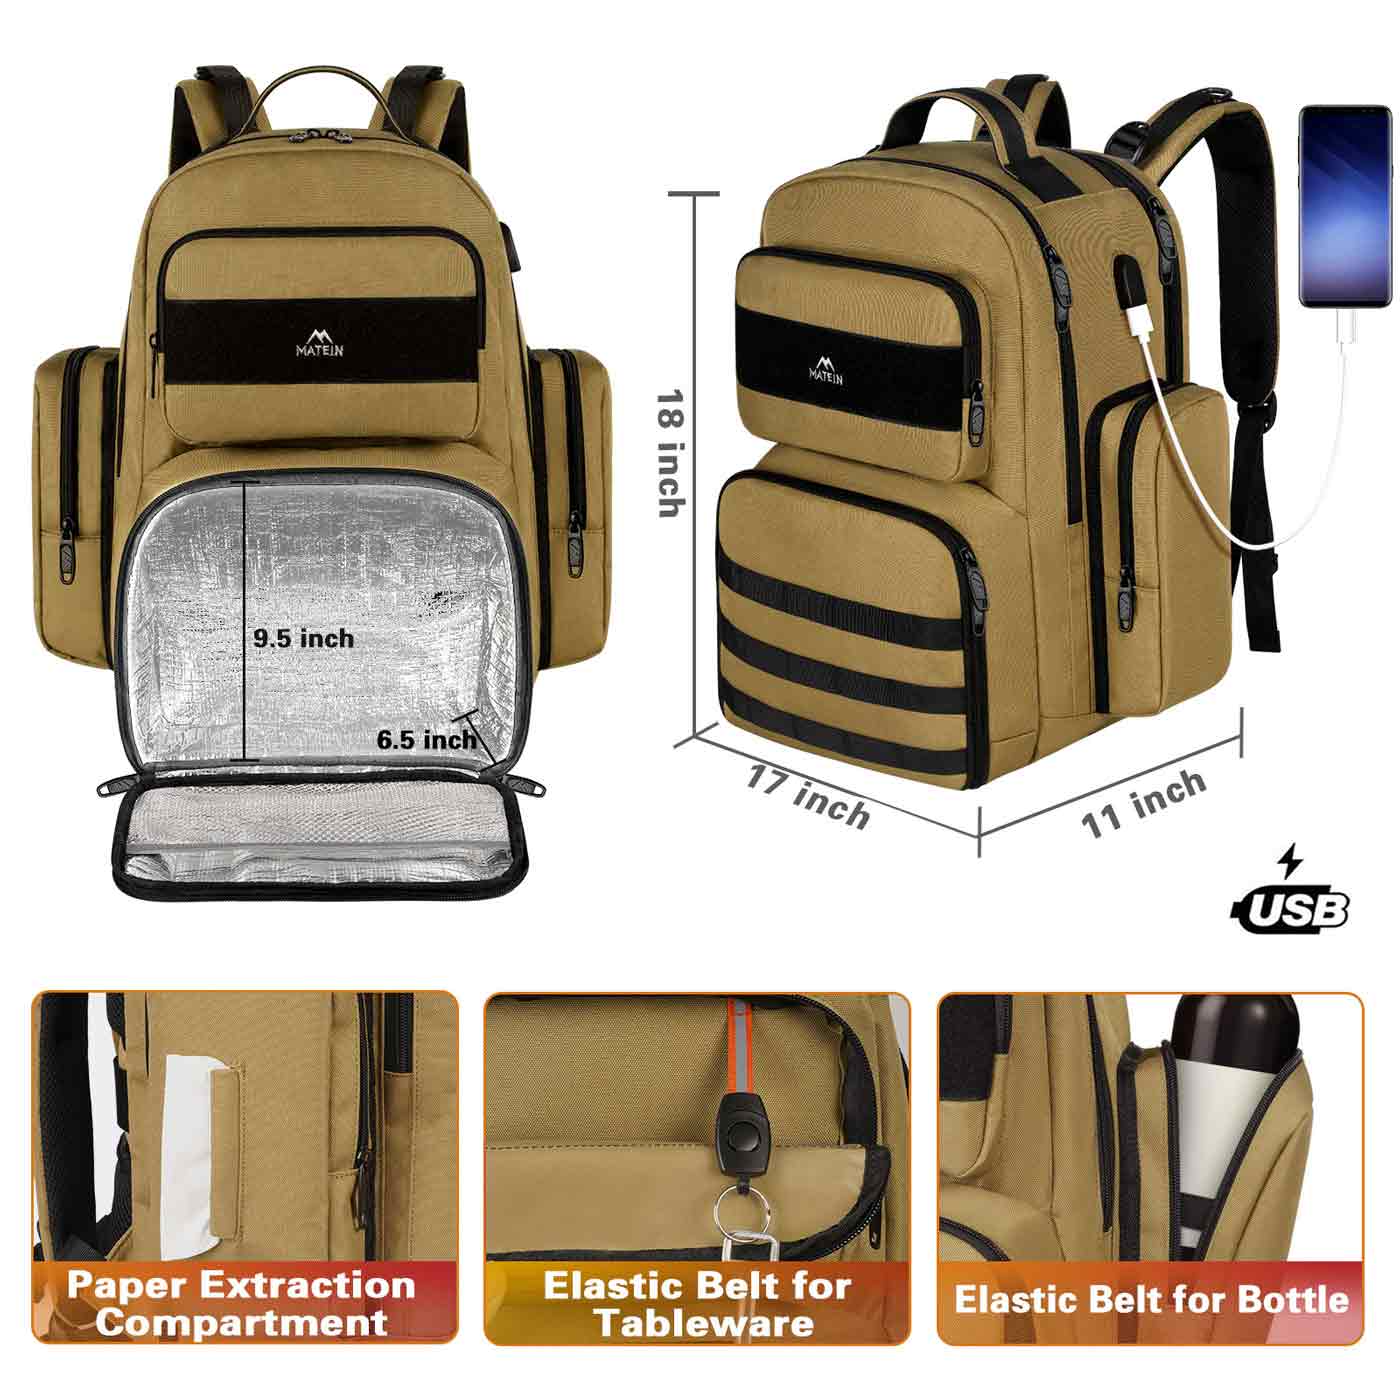 Matein Lunch Box Backpack Lunch Bag